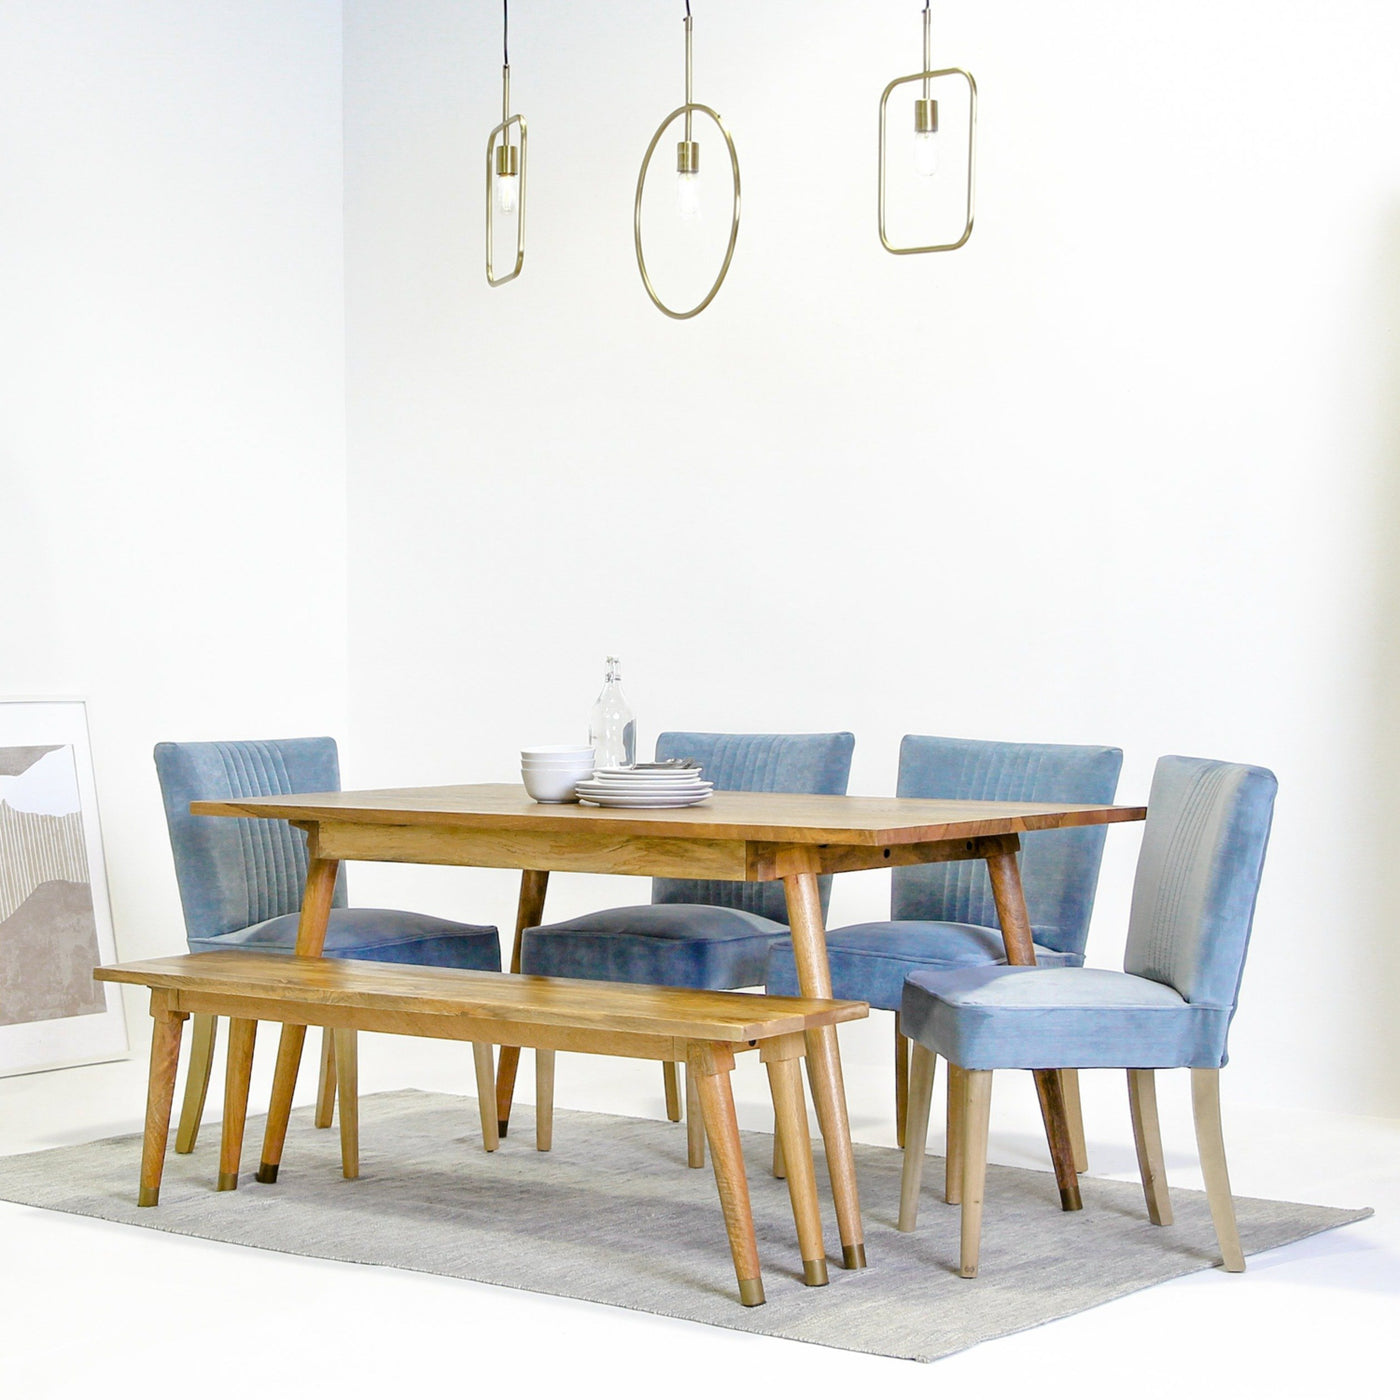 Clio 8-Seat Dining Table in Light Honey Finish